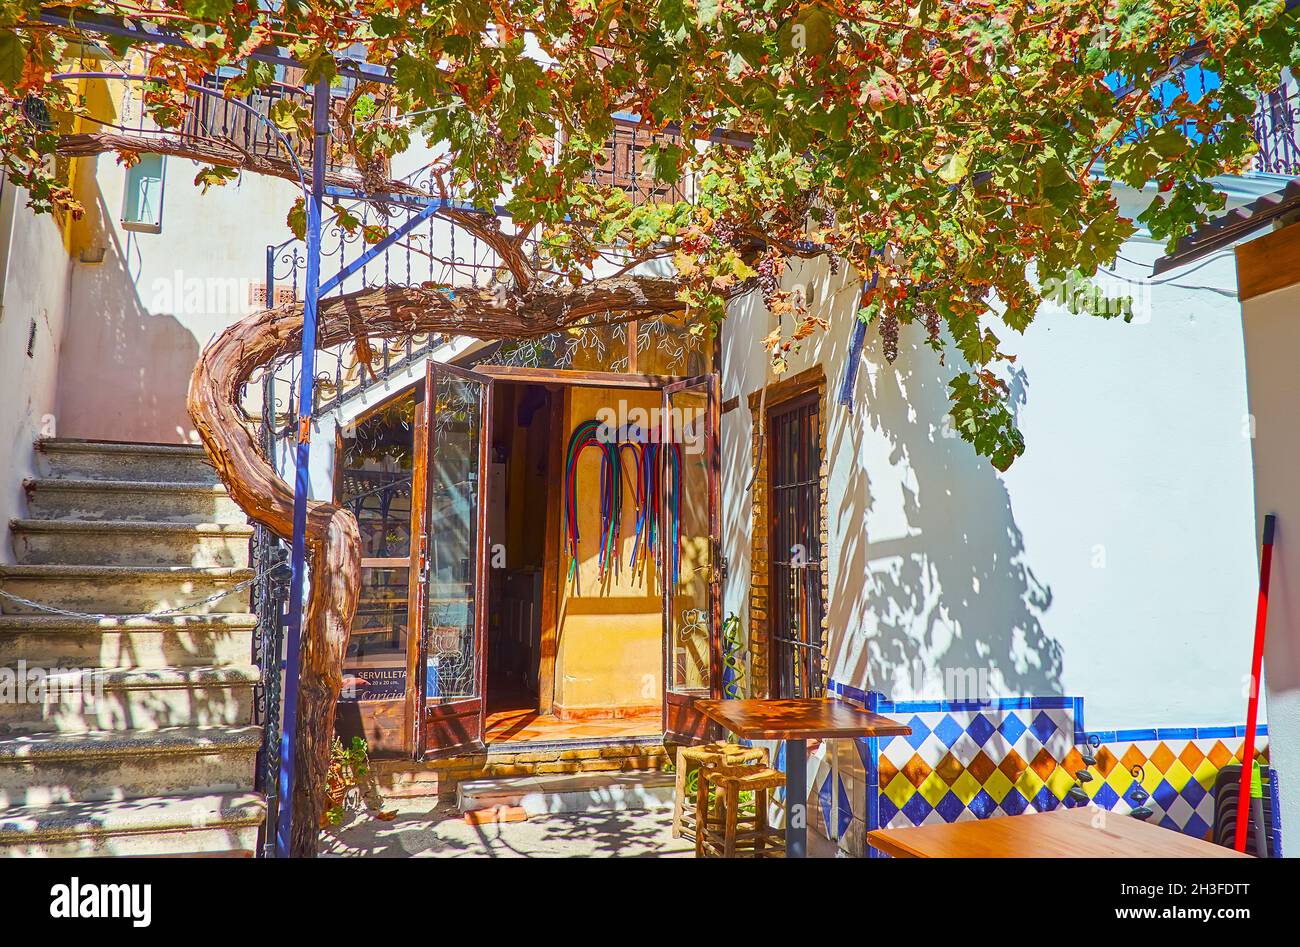 The old terrace of the teahouse in Albaicin neighborhood with narrow staircase and shady grapevine, Granada, Spain Stock Photo